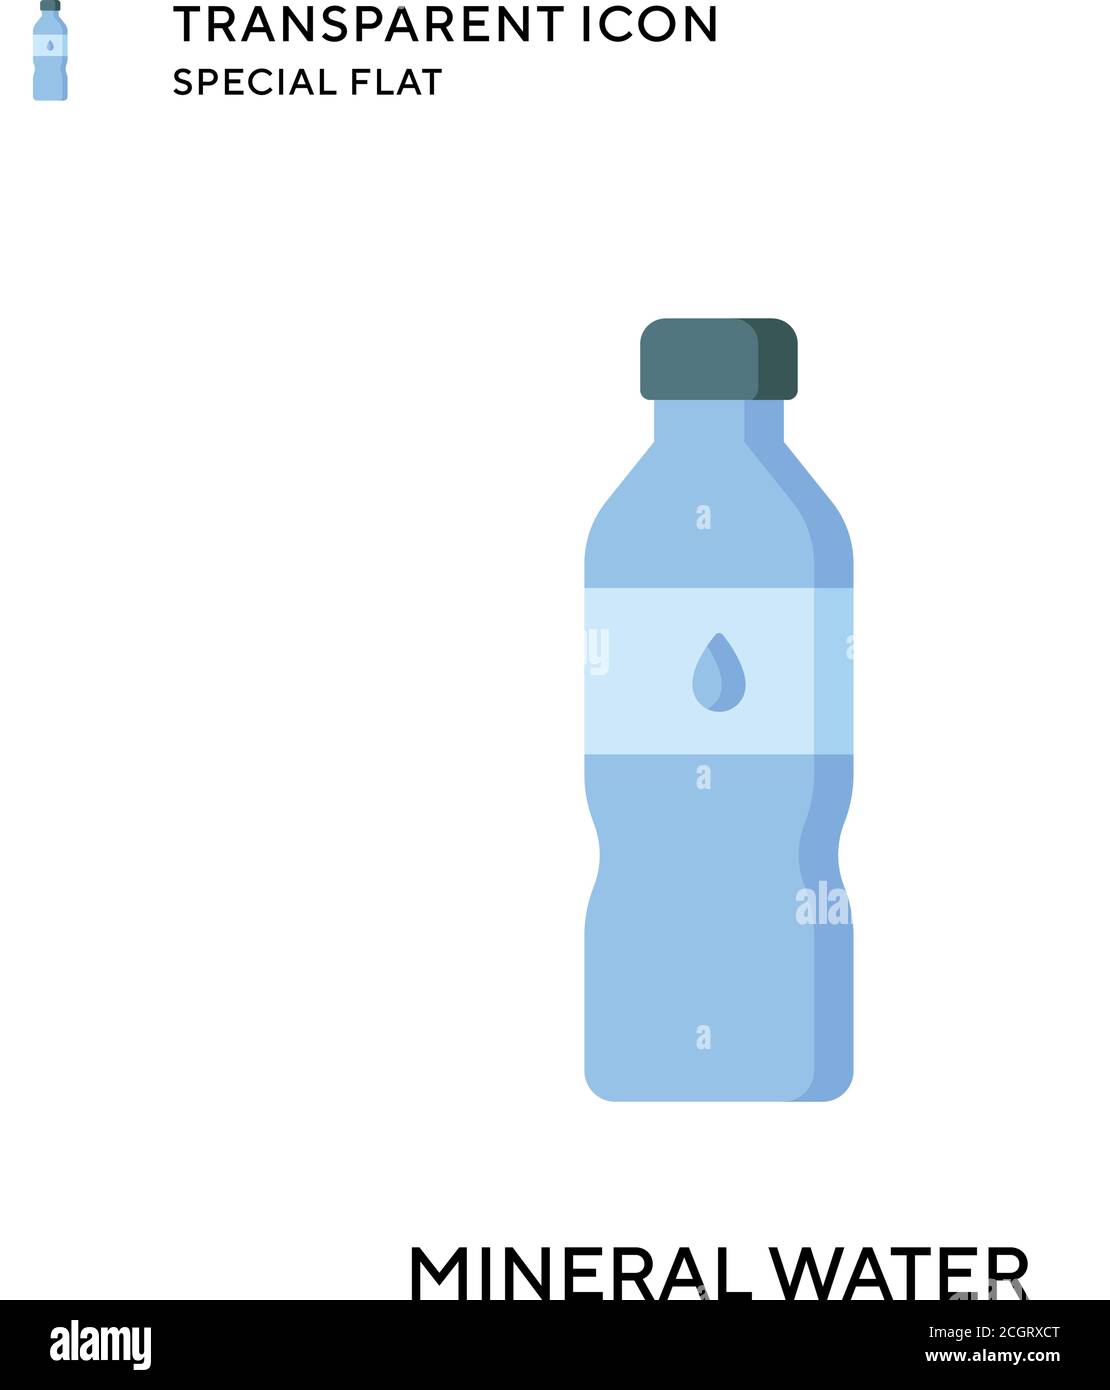 Mineral water vector icon. Flat style illustration. EPS 10 vector. Stock Vector